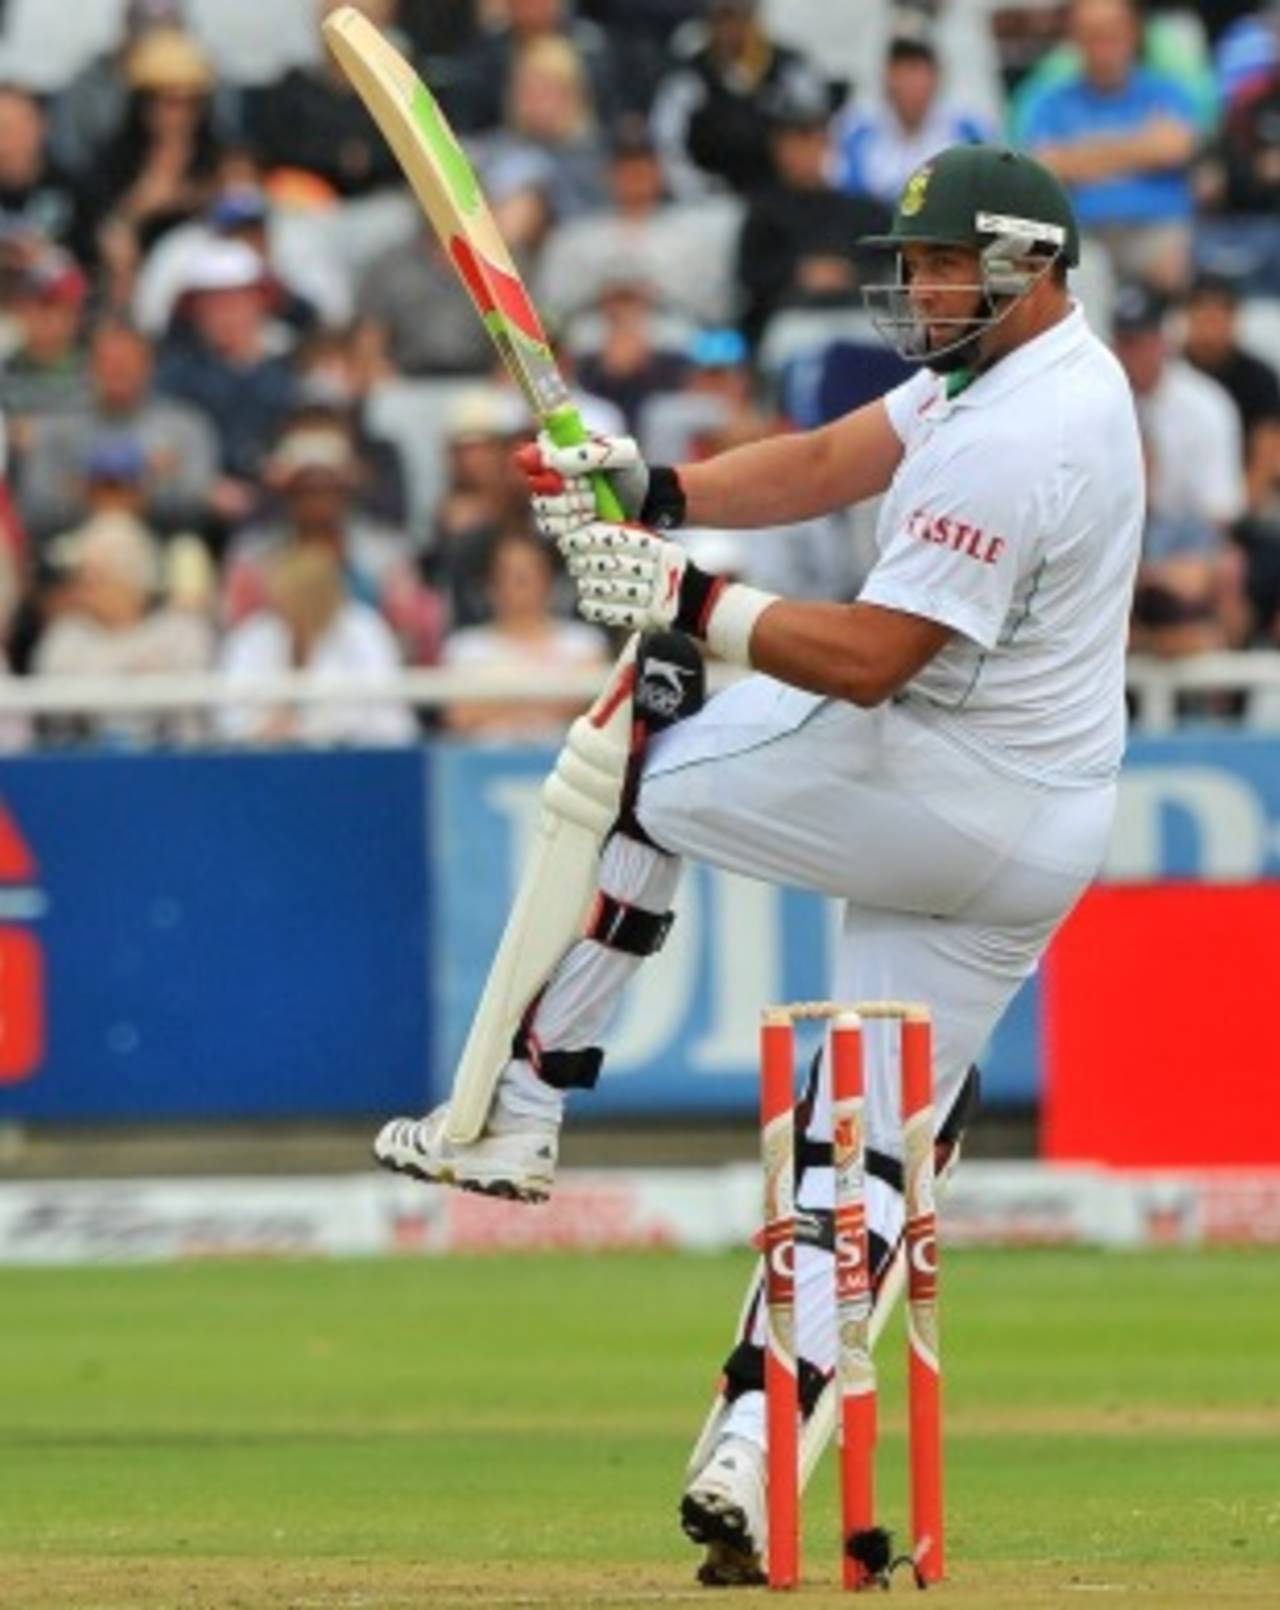 Jacques Kallis scored a century and a half-century in his first three Test innings in England, but since then he has struggled for runs&nbsp;&nbsp;&bull;&nbsp;&nbsp;AFP